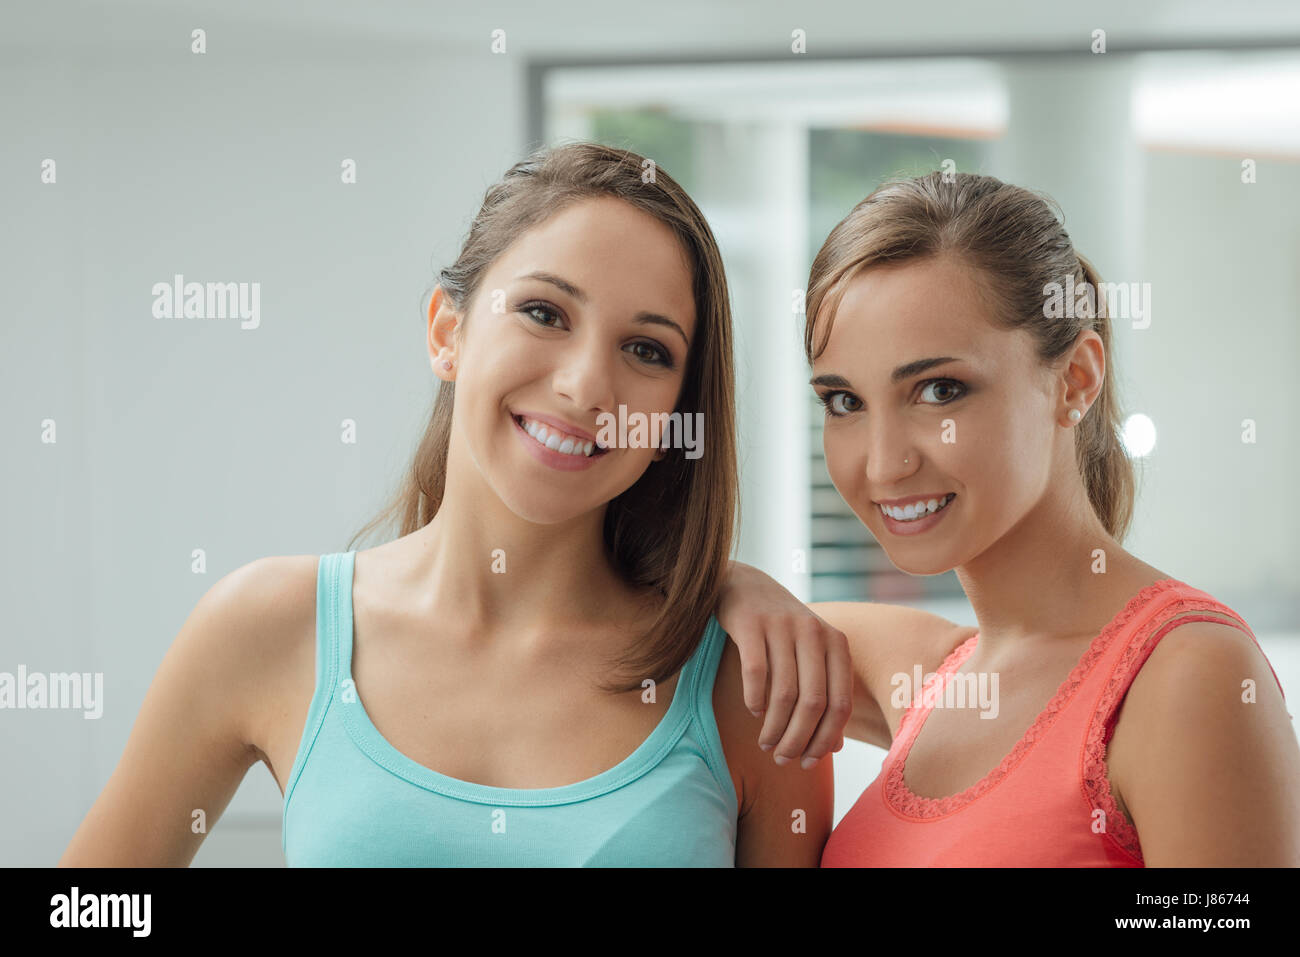 Cute smiling girls posing together and looking at camera, one is leaning on her friend's shoulder Stock Photo